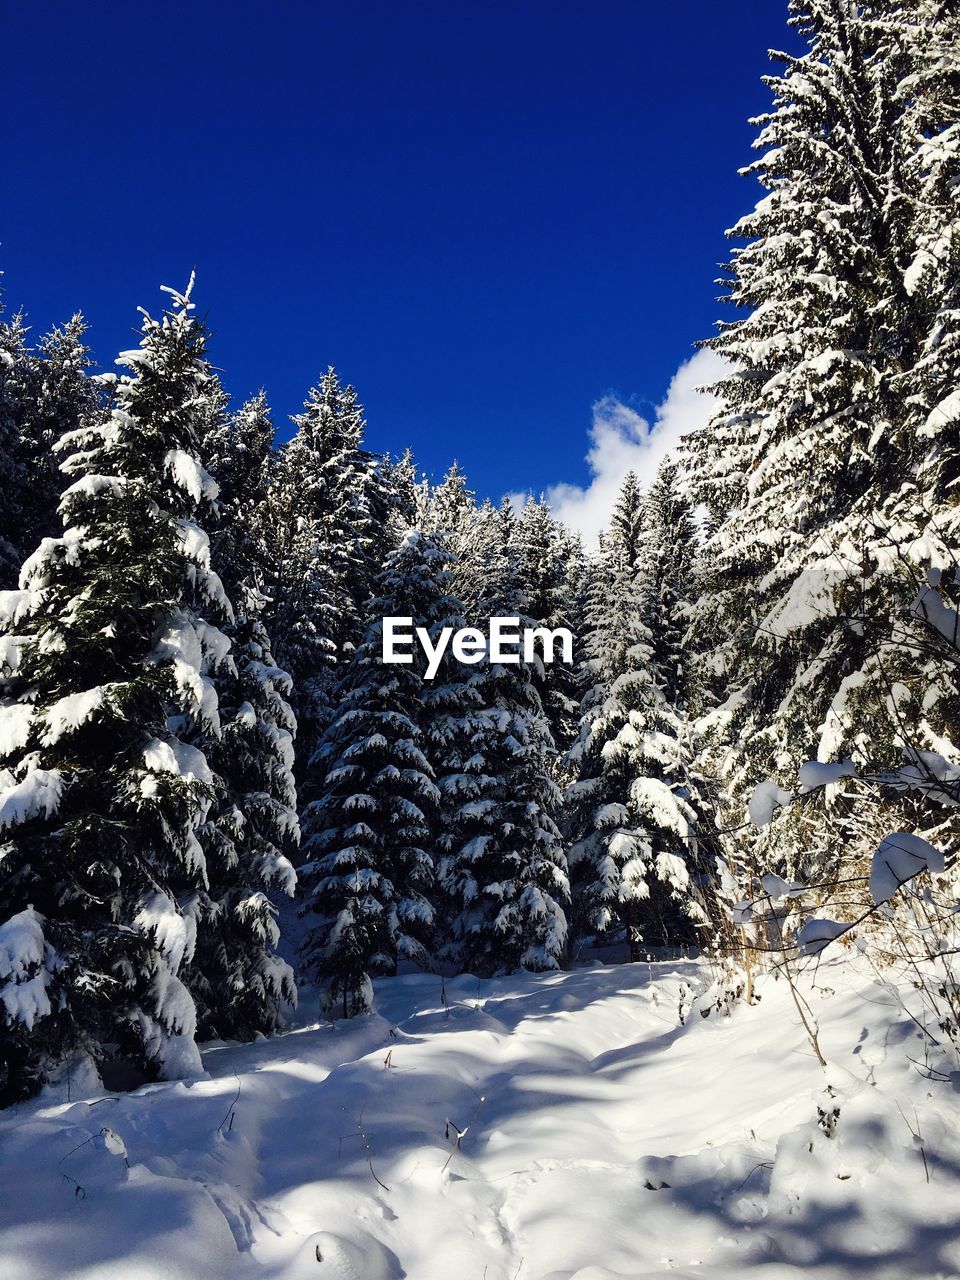 SNOW COVERED PINE TREES AGAINST CLEAR SKY